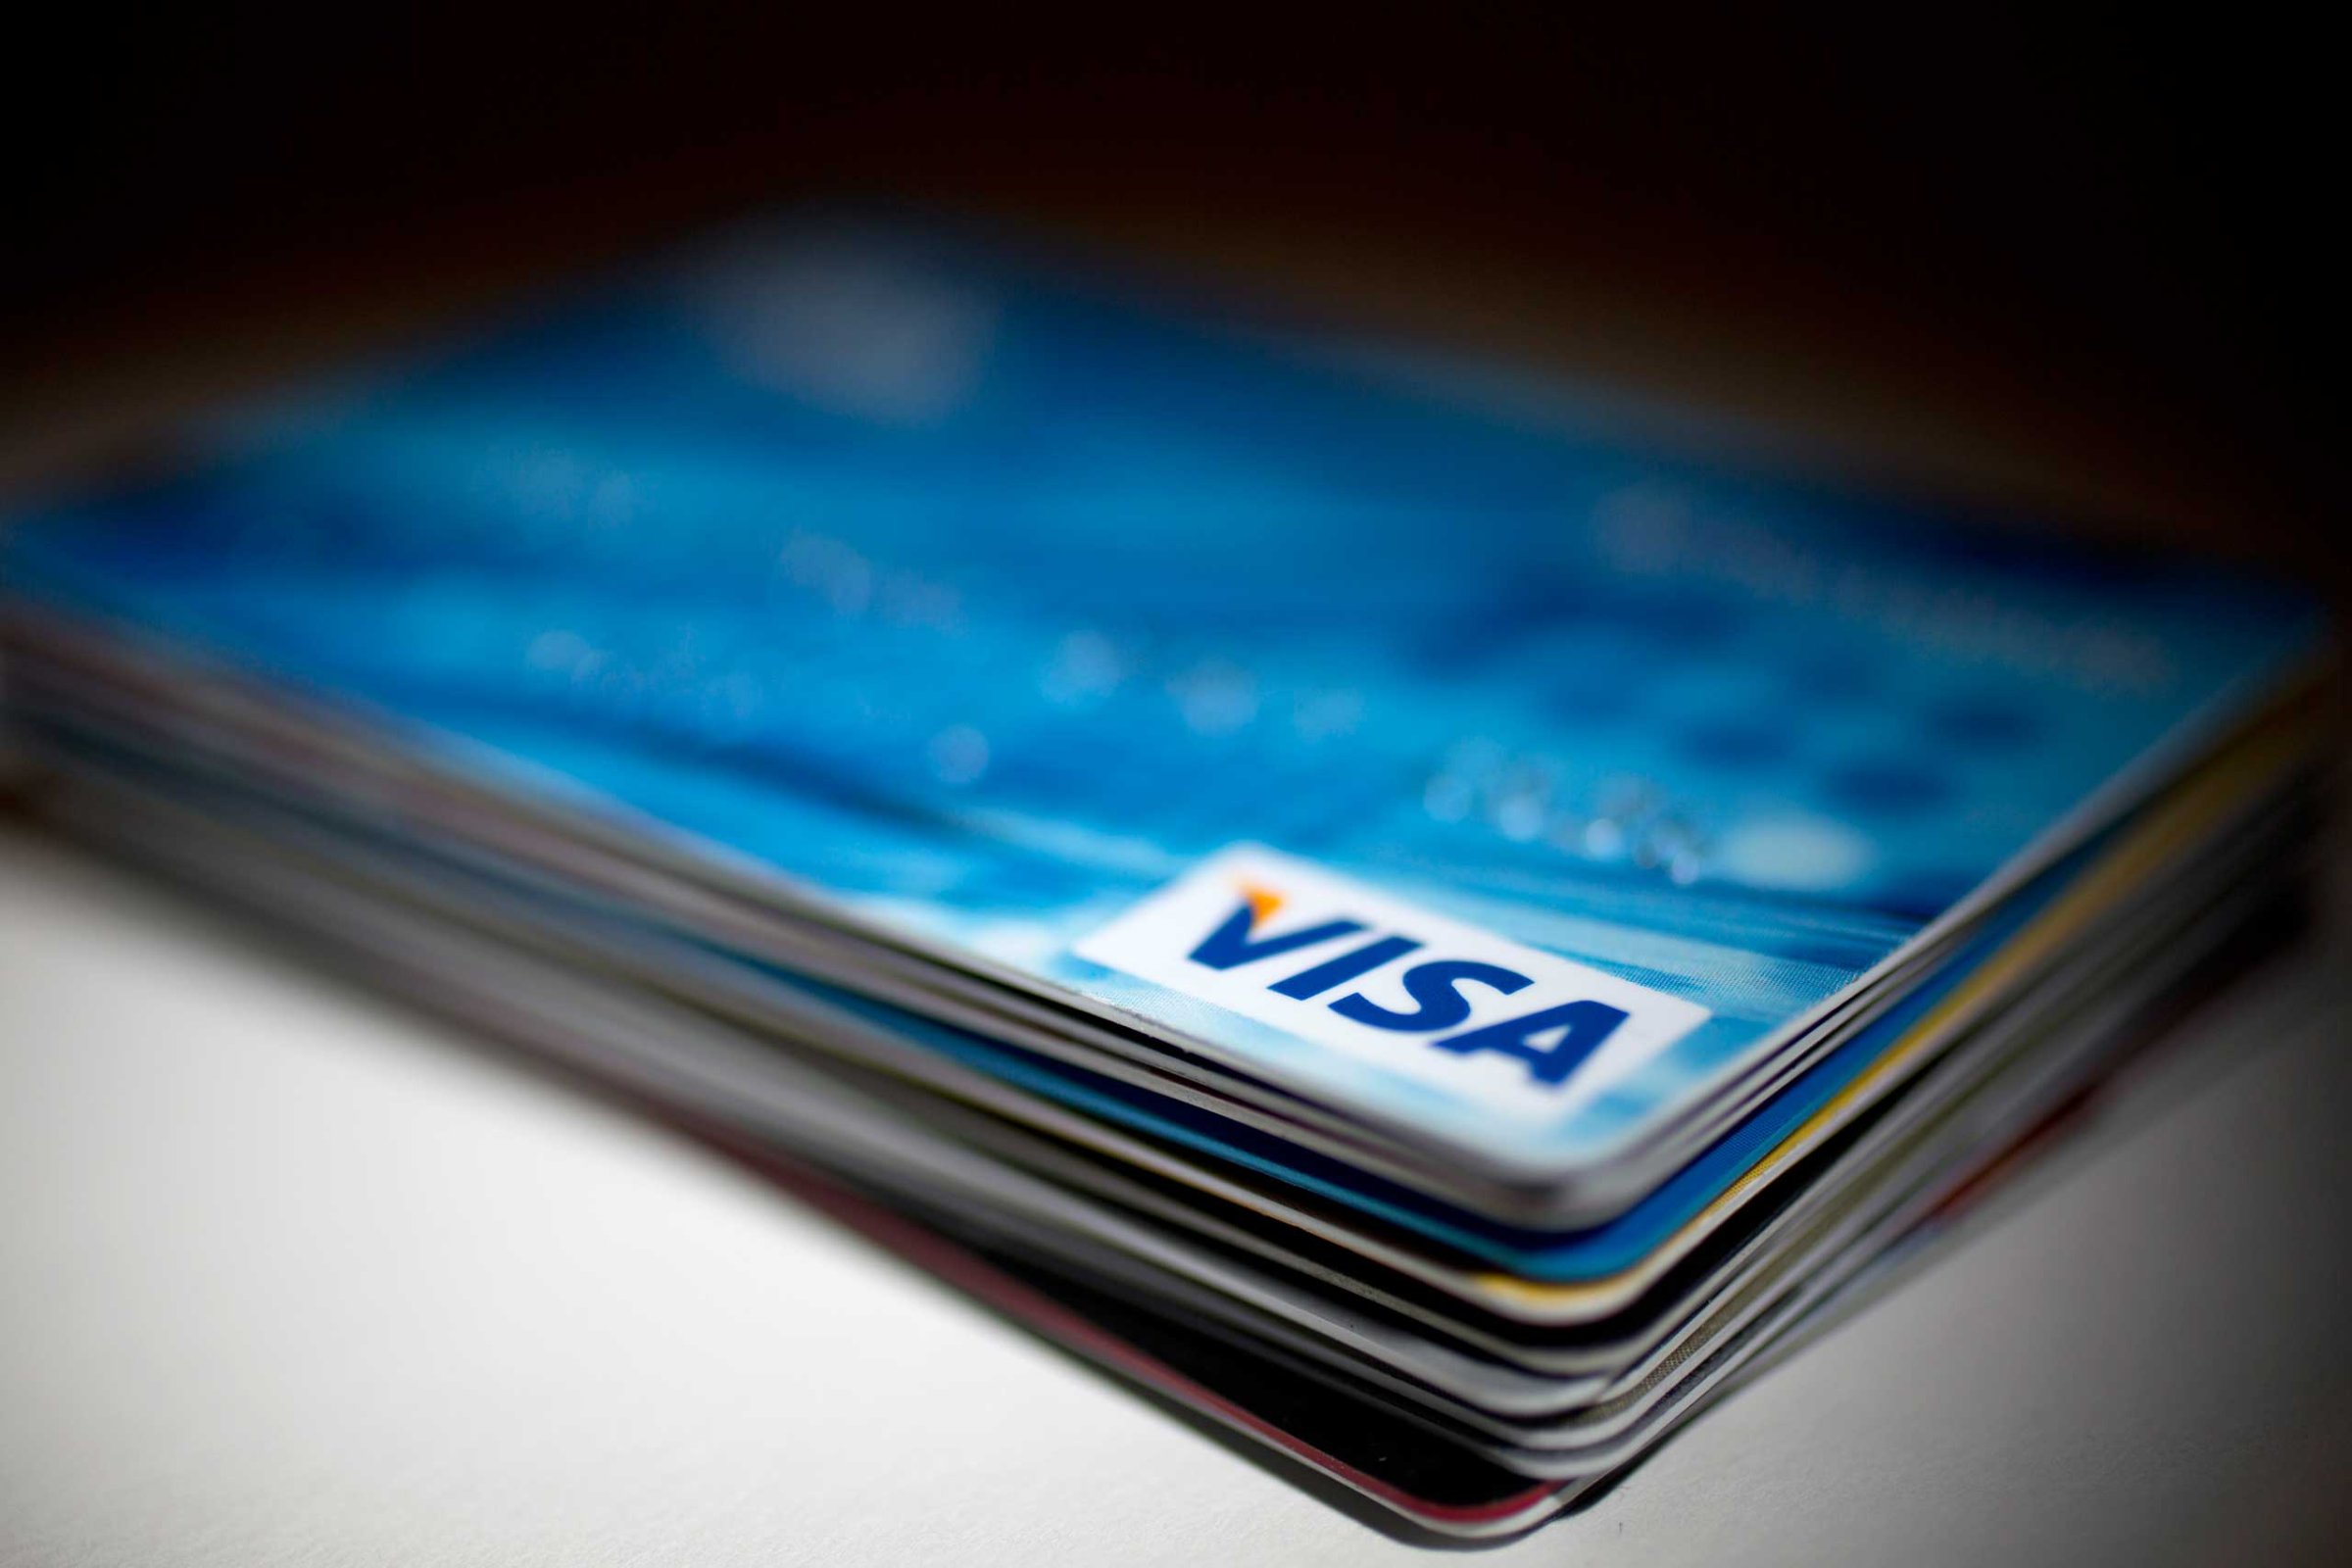 A Visa Inc. credit card sits on top of credit and debit cards arranged for a photograph in Washington on Jan. 29, 2014.